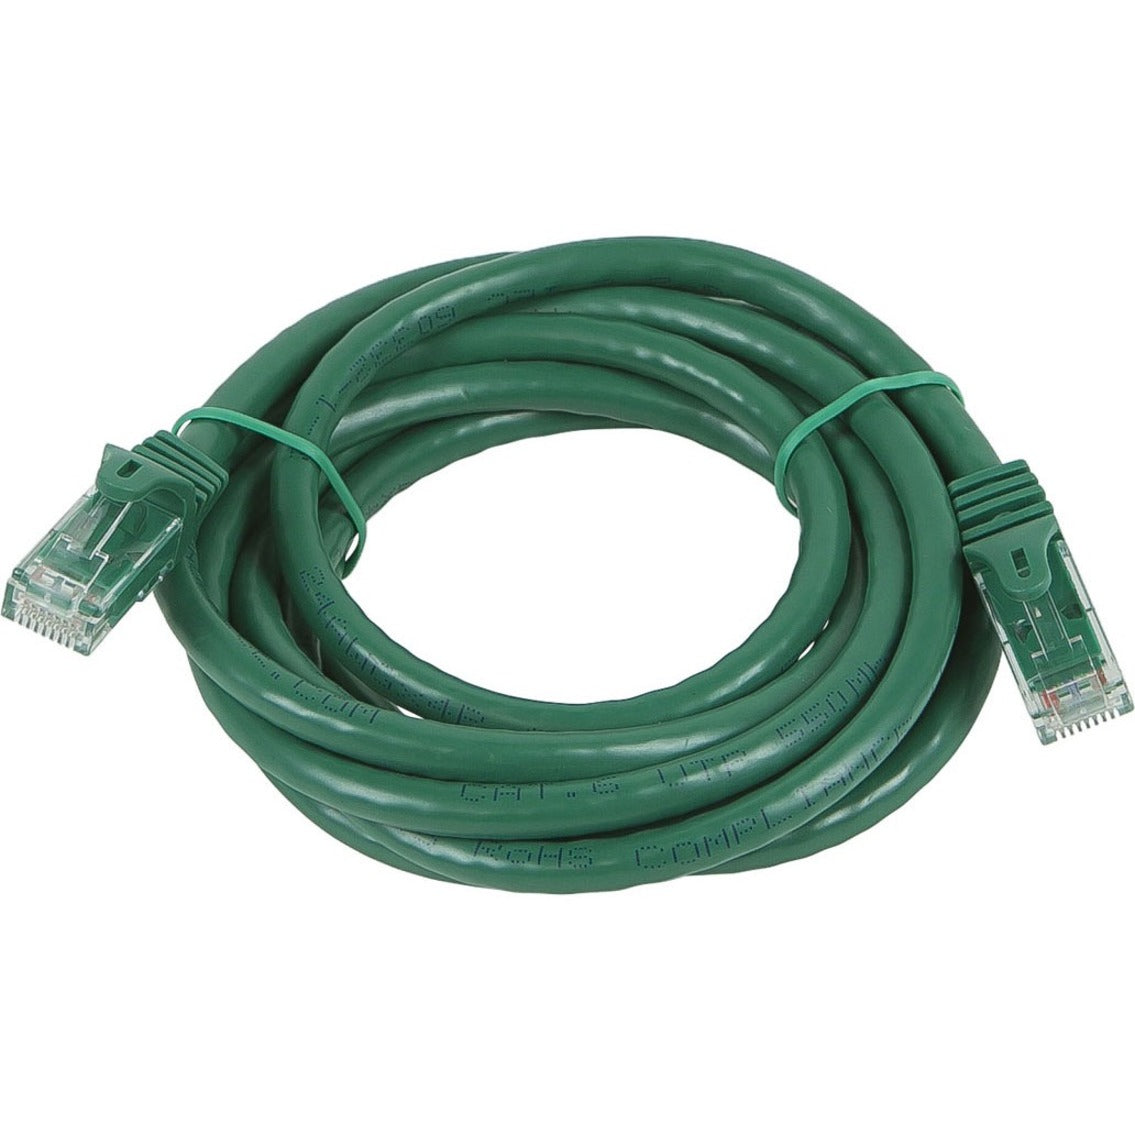 Monoprice 11384 FLEXboot Series Cat5e 24AWG UTP Ethernet Network Patch Cable, 7ft Green